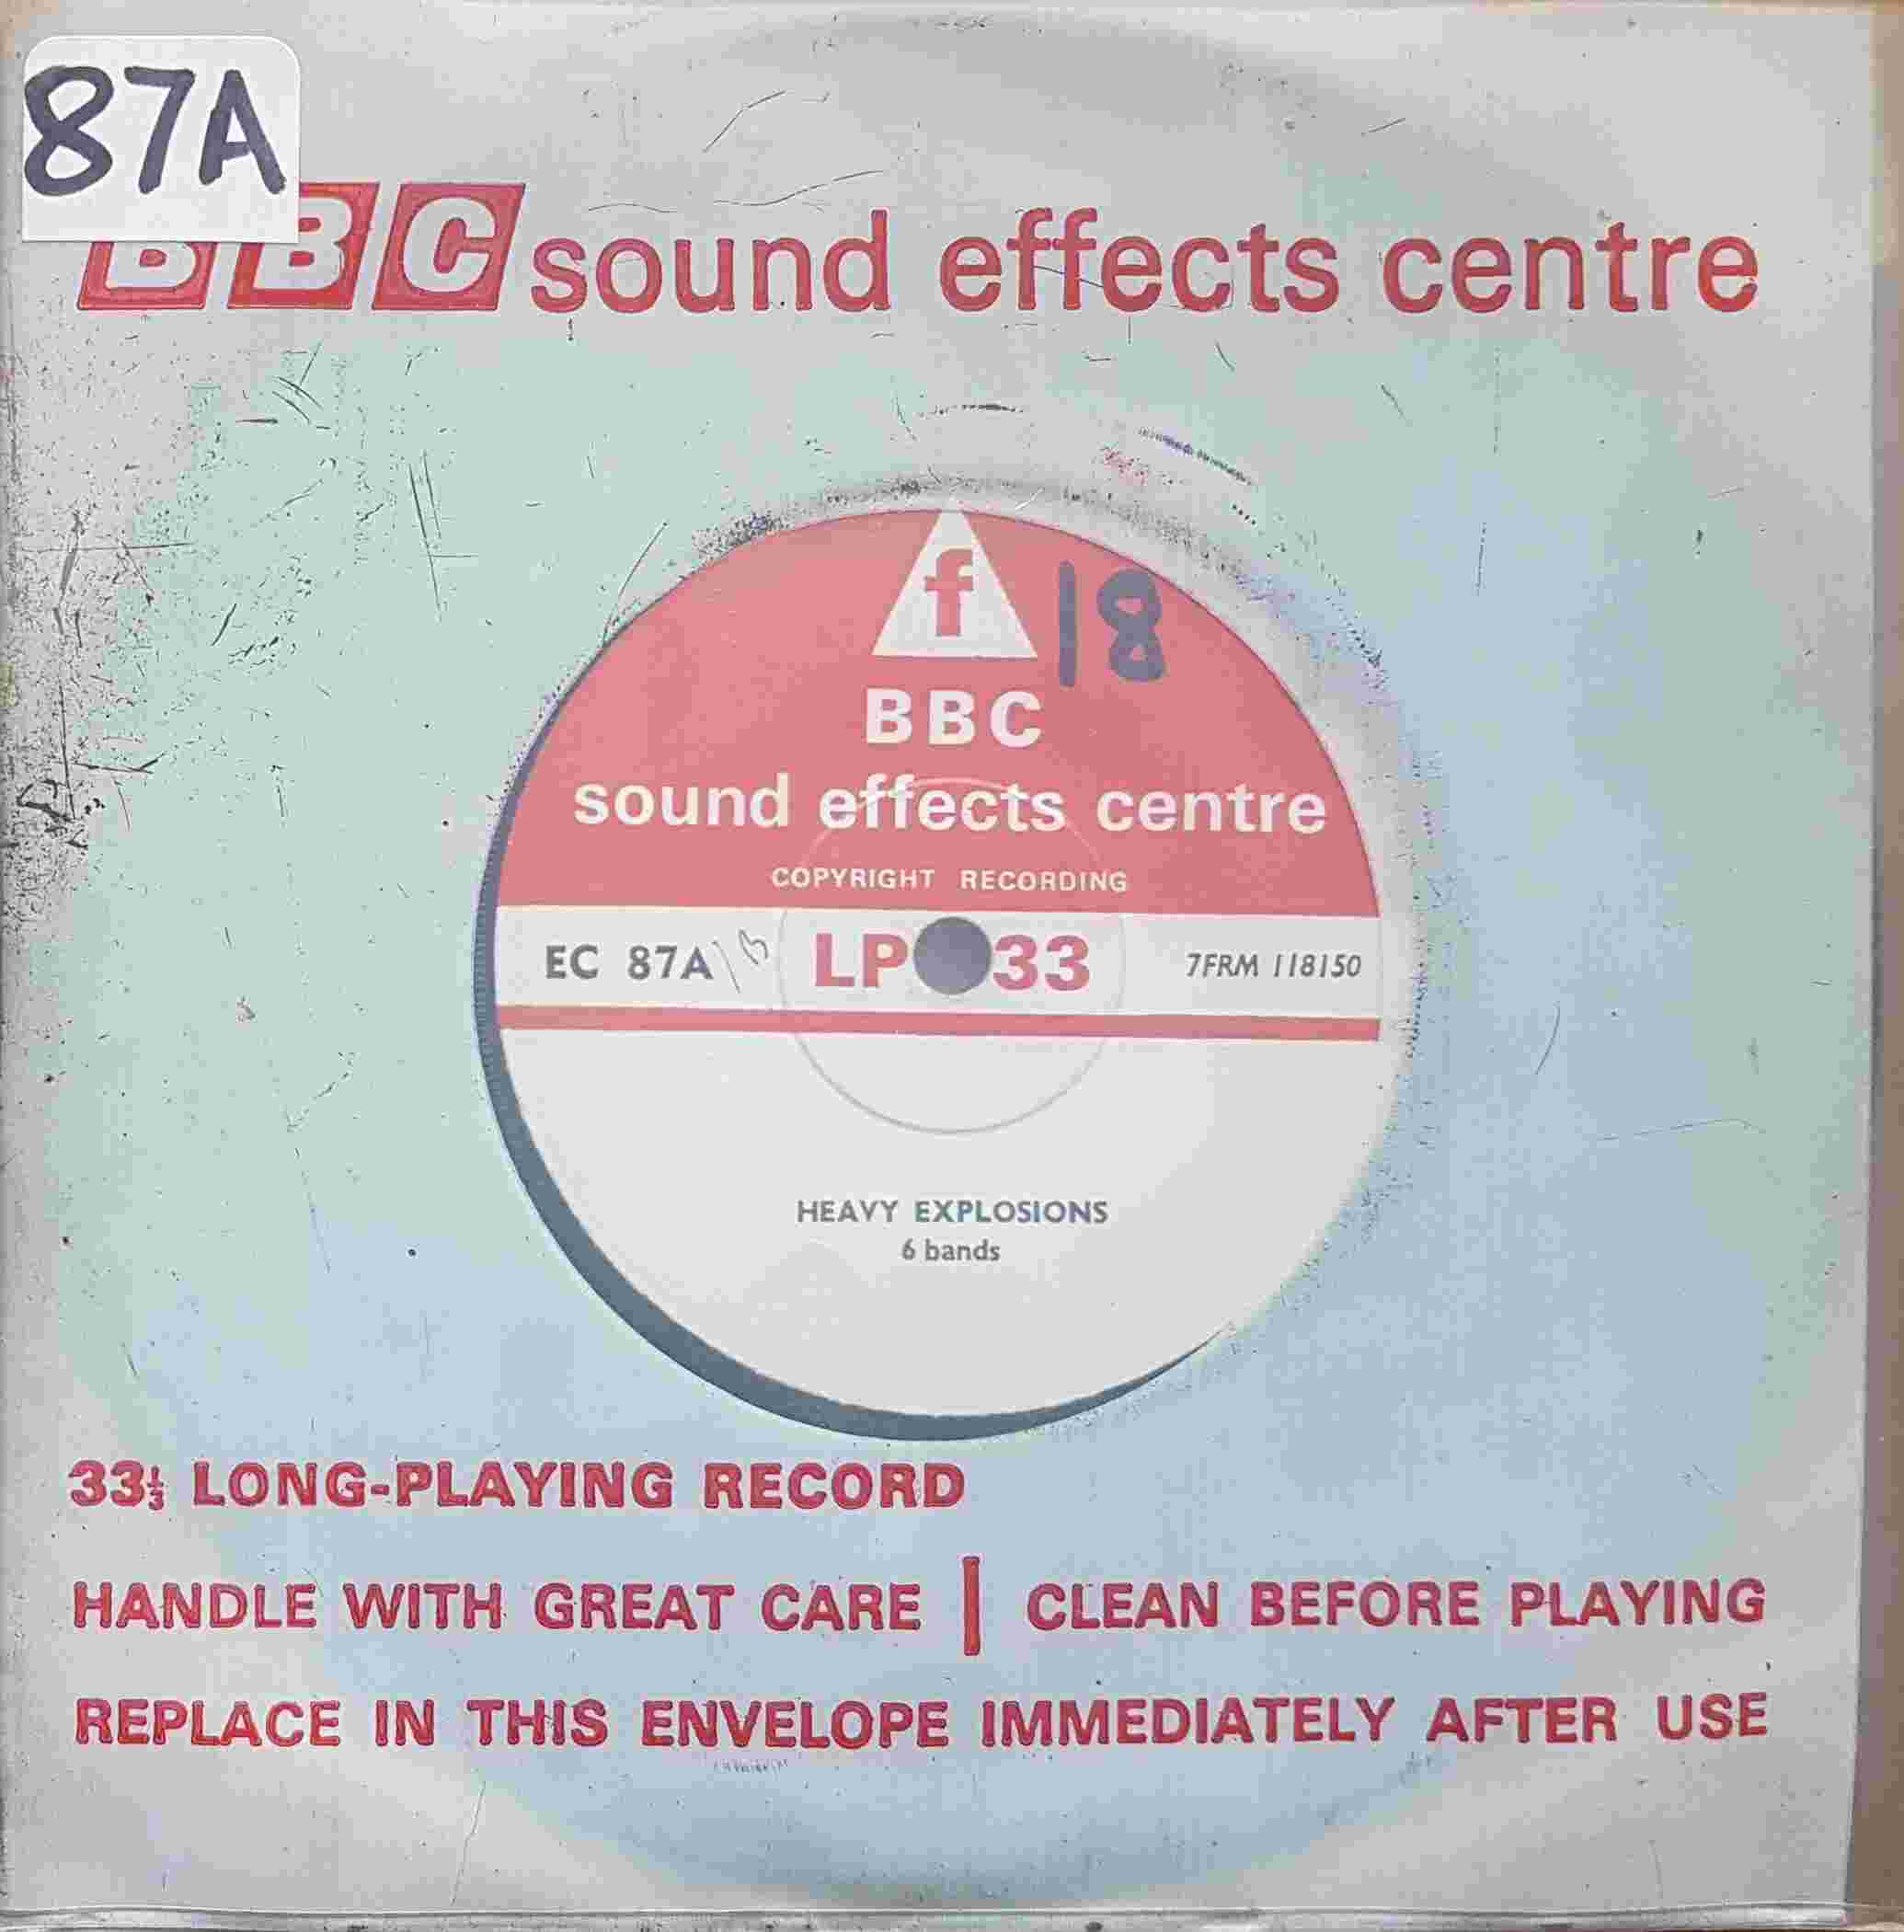 Picture of EC 87A Heavy explosions by artist Not registered from the BBC records and Tapes library